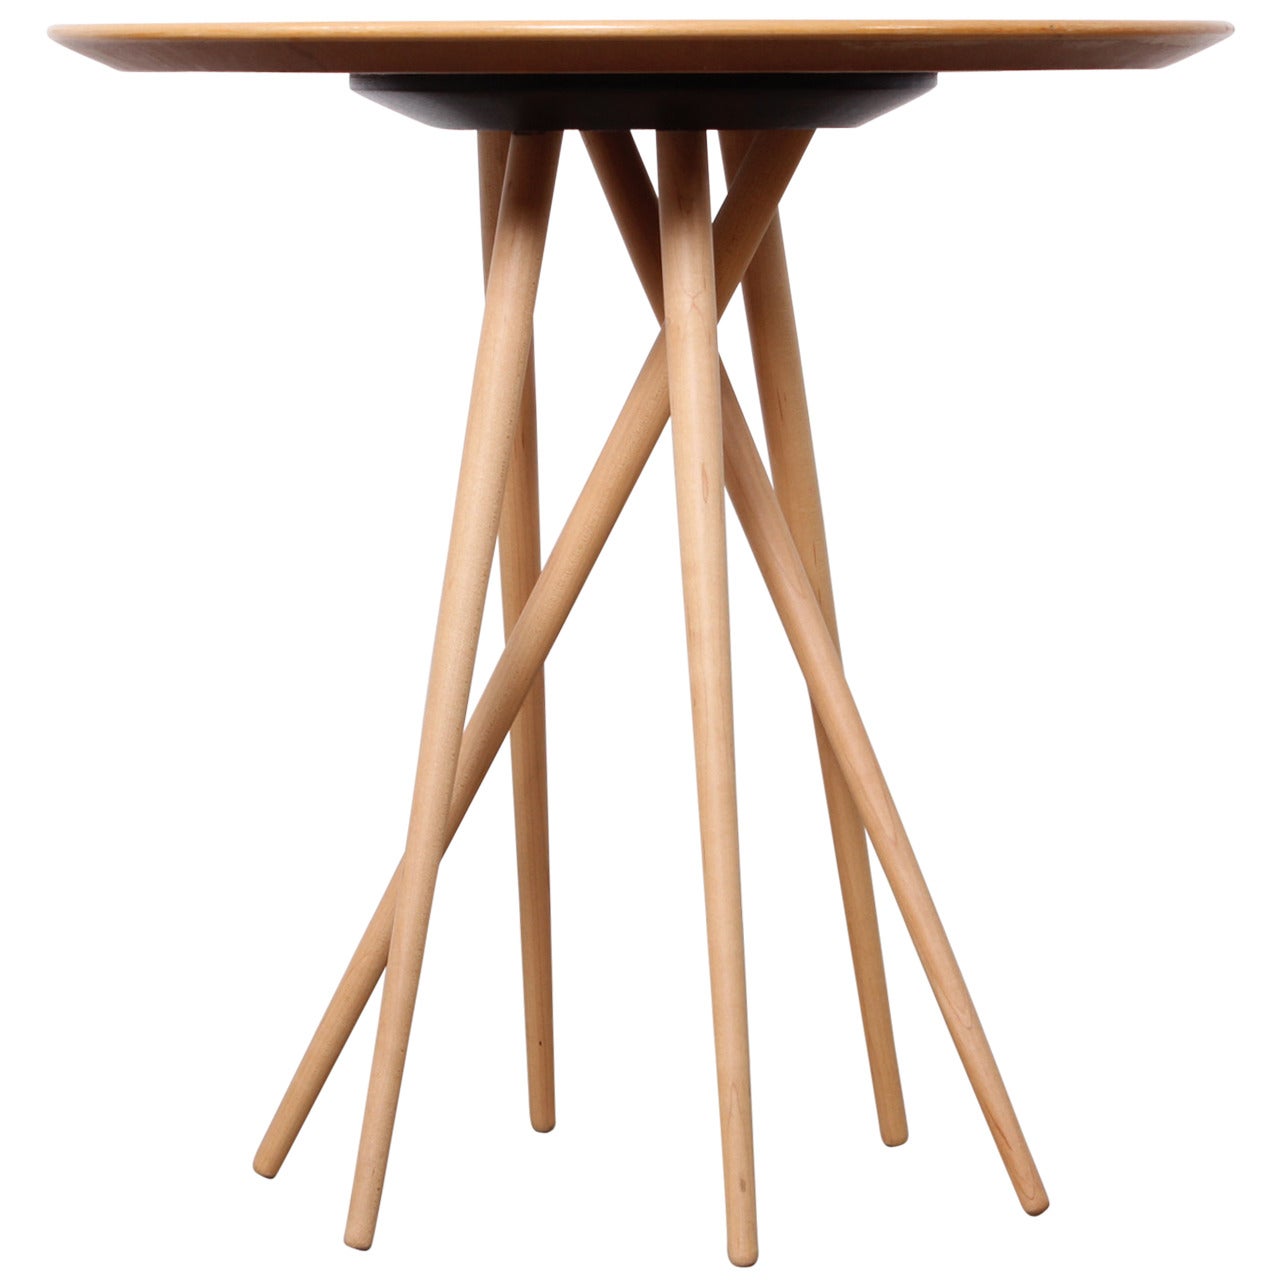 Toothpick Table by Lawrence Laske for Knoll